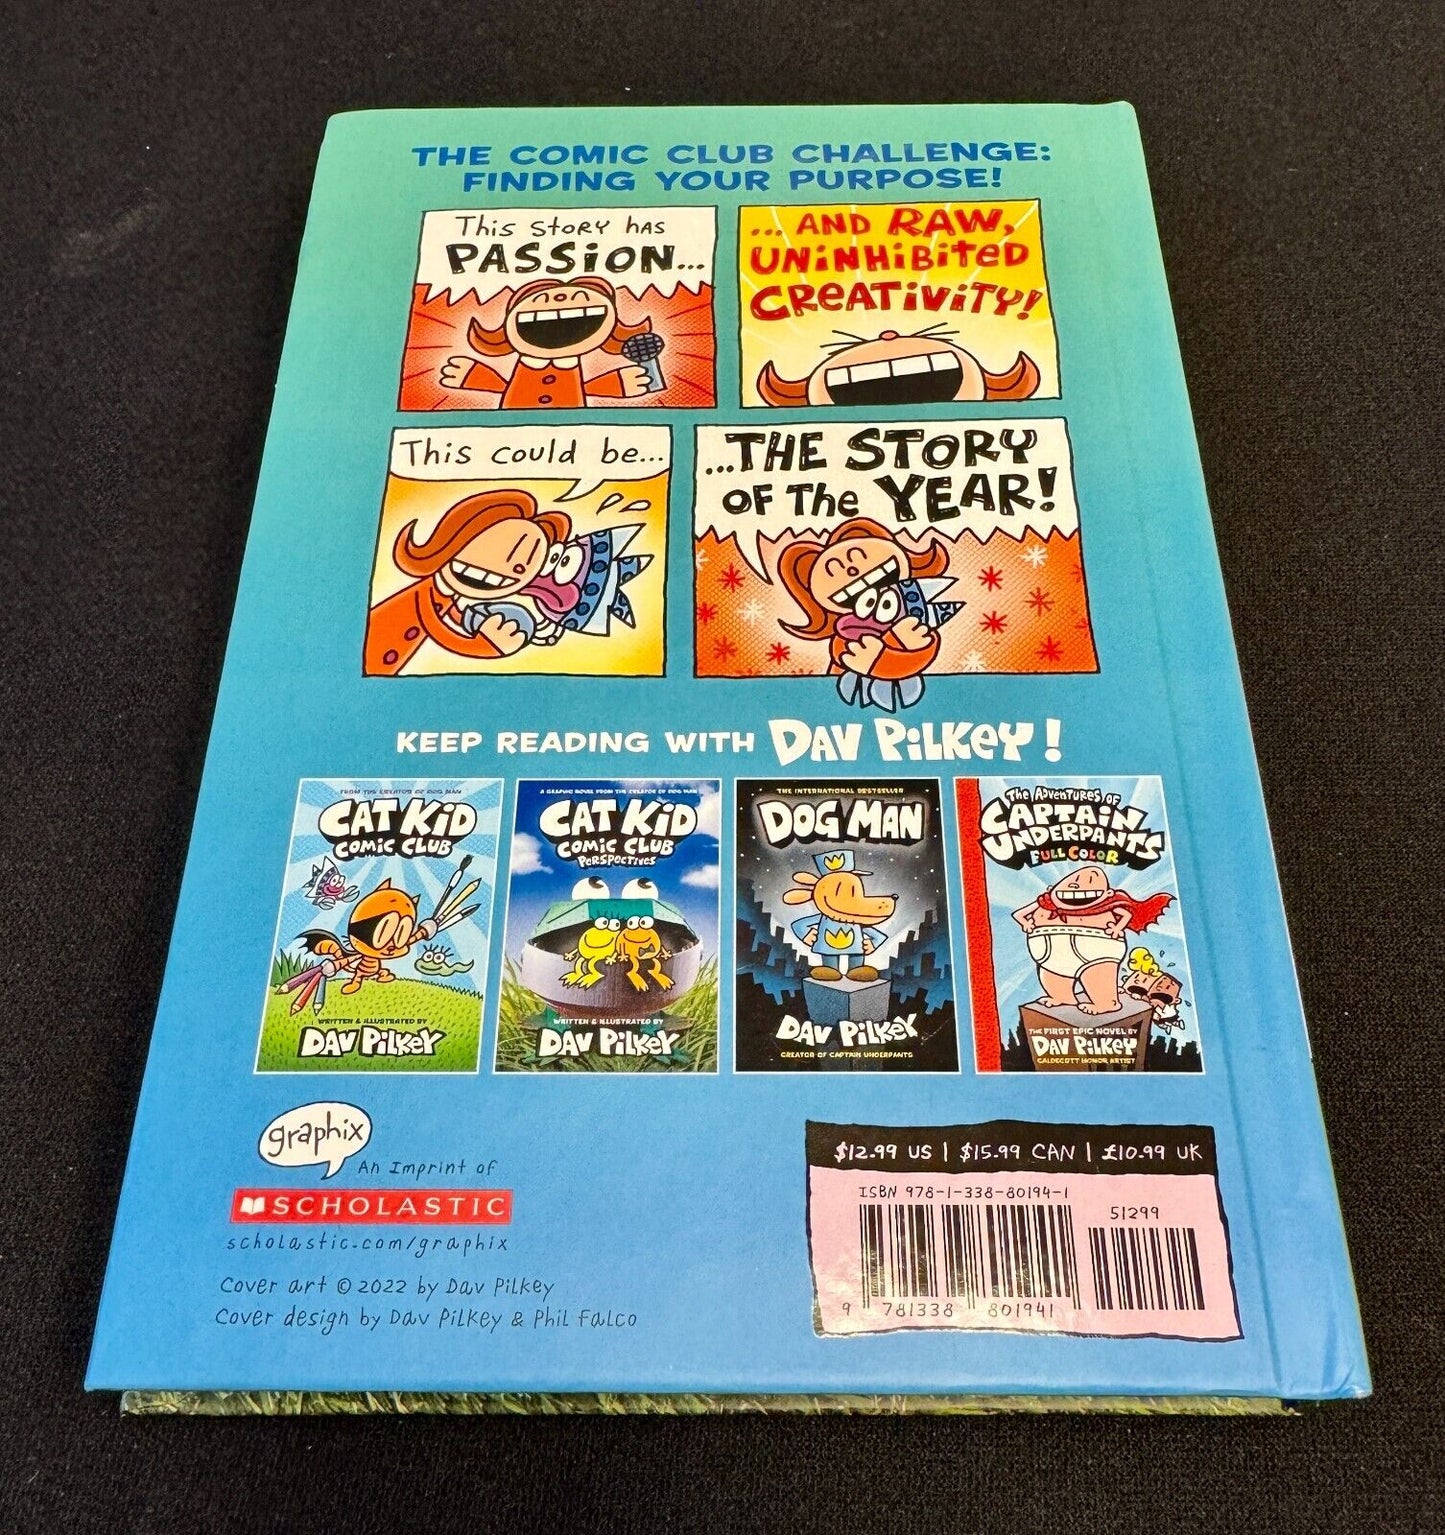 Lot of 3 Dog Man & Cat Kid From the Creator of Captain Underpants - Hardcover